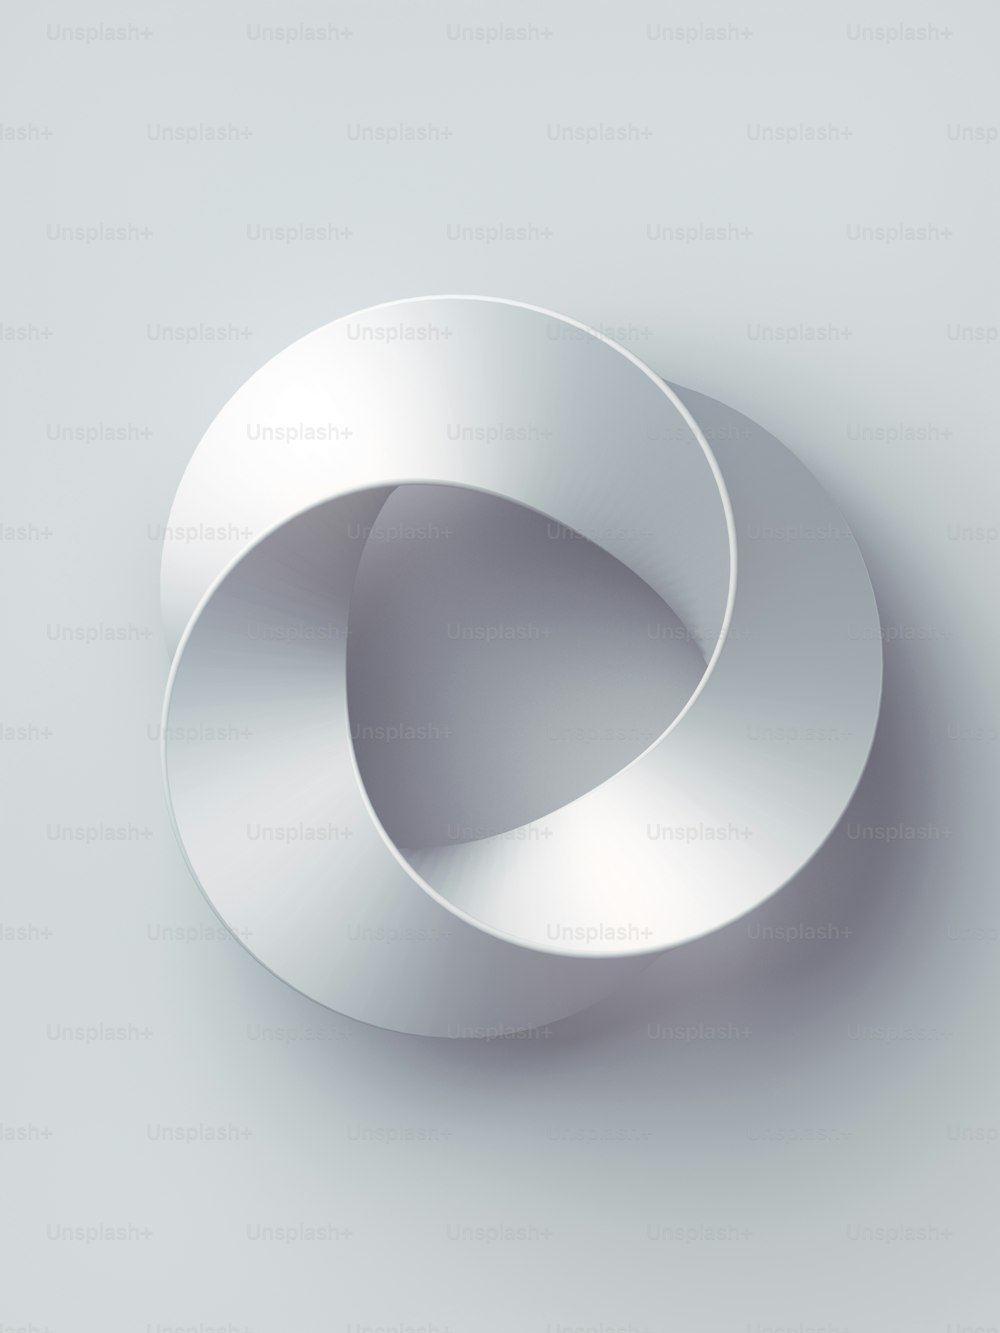 Mobius strip ring sacred geometry. Spatial figure with upturned surfaces. 3d rendering cover design on white background. Minimal art, abstract digital illustration